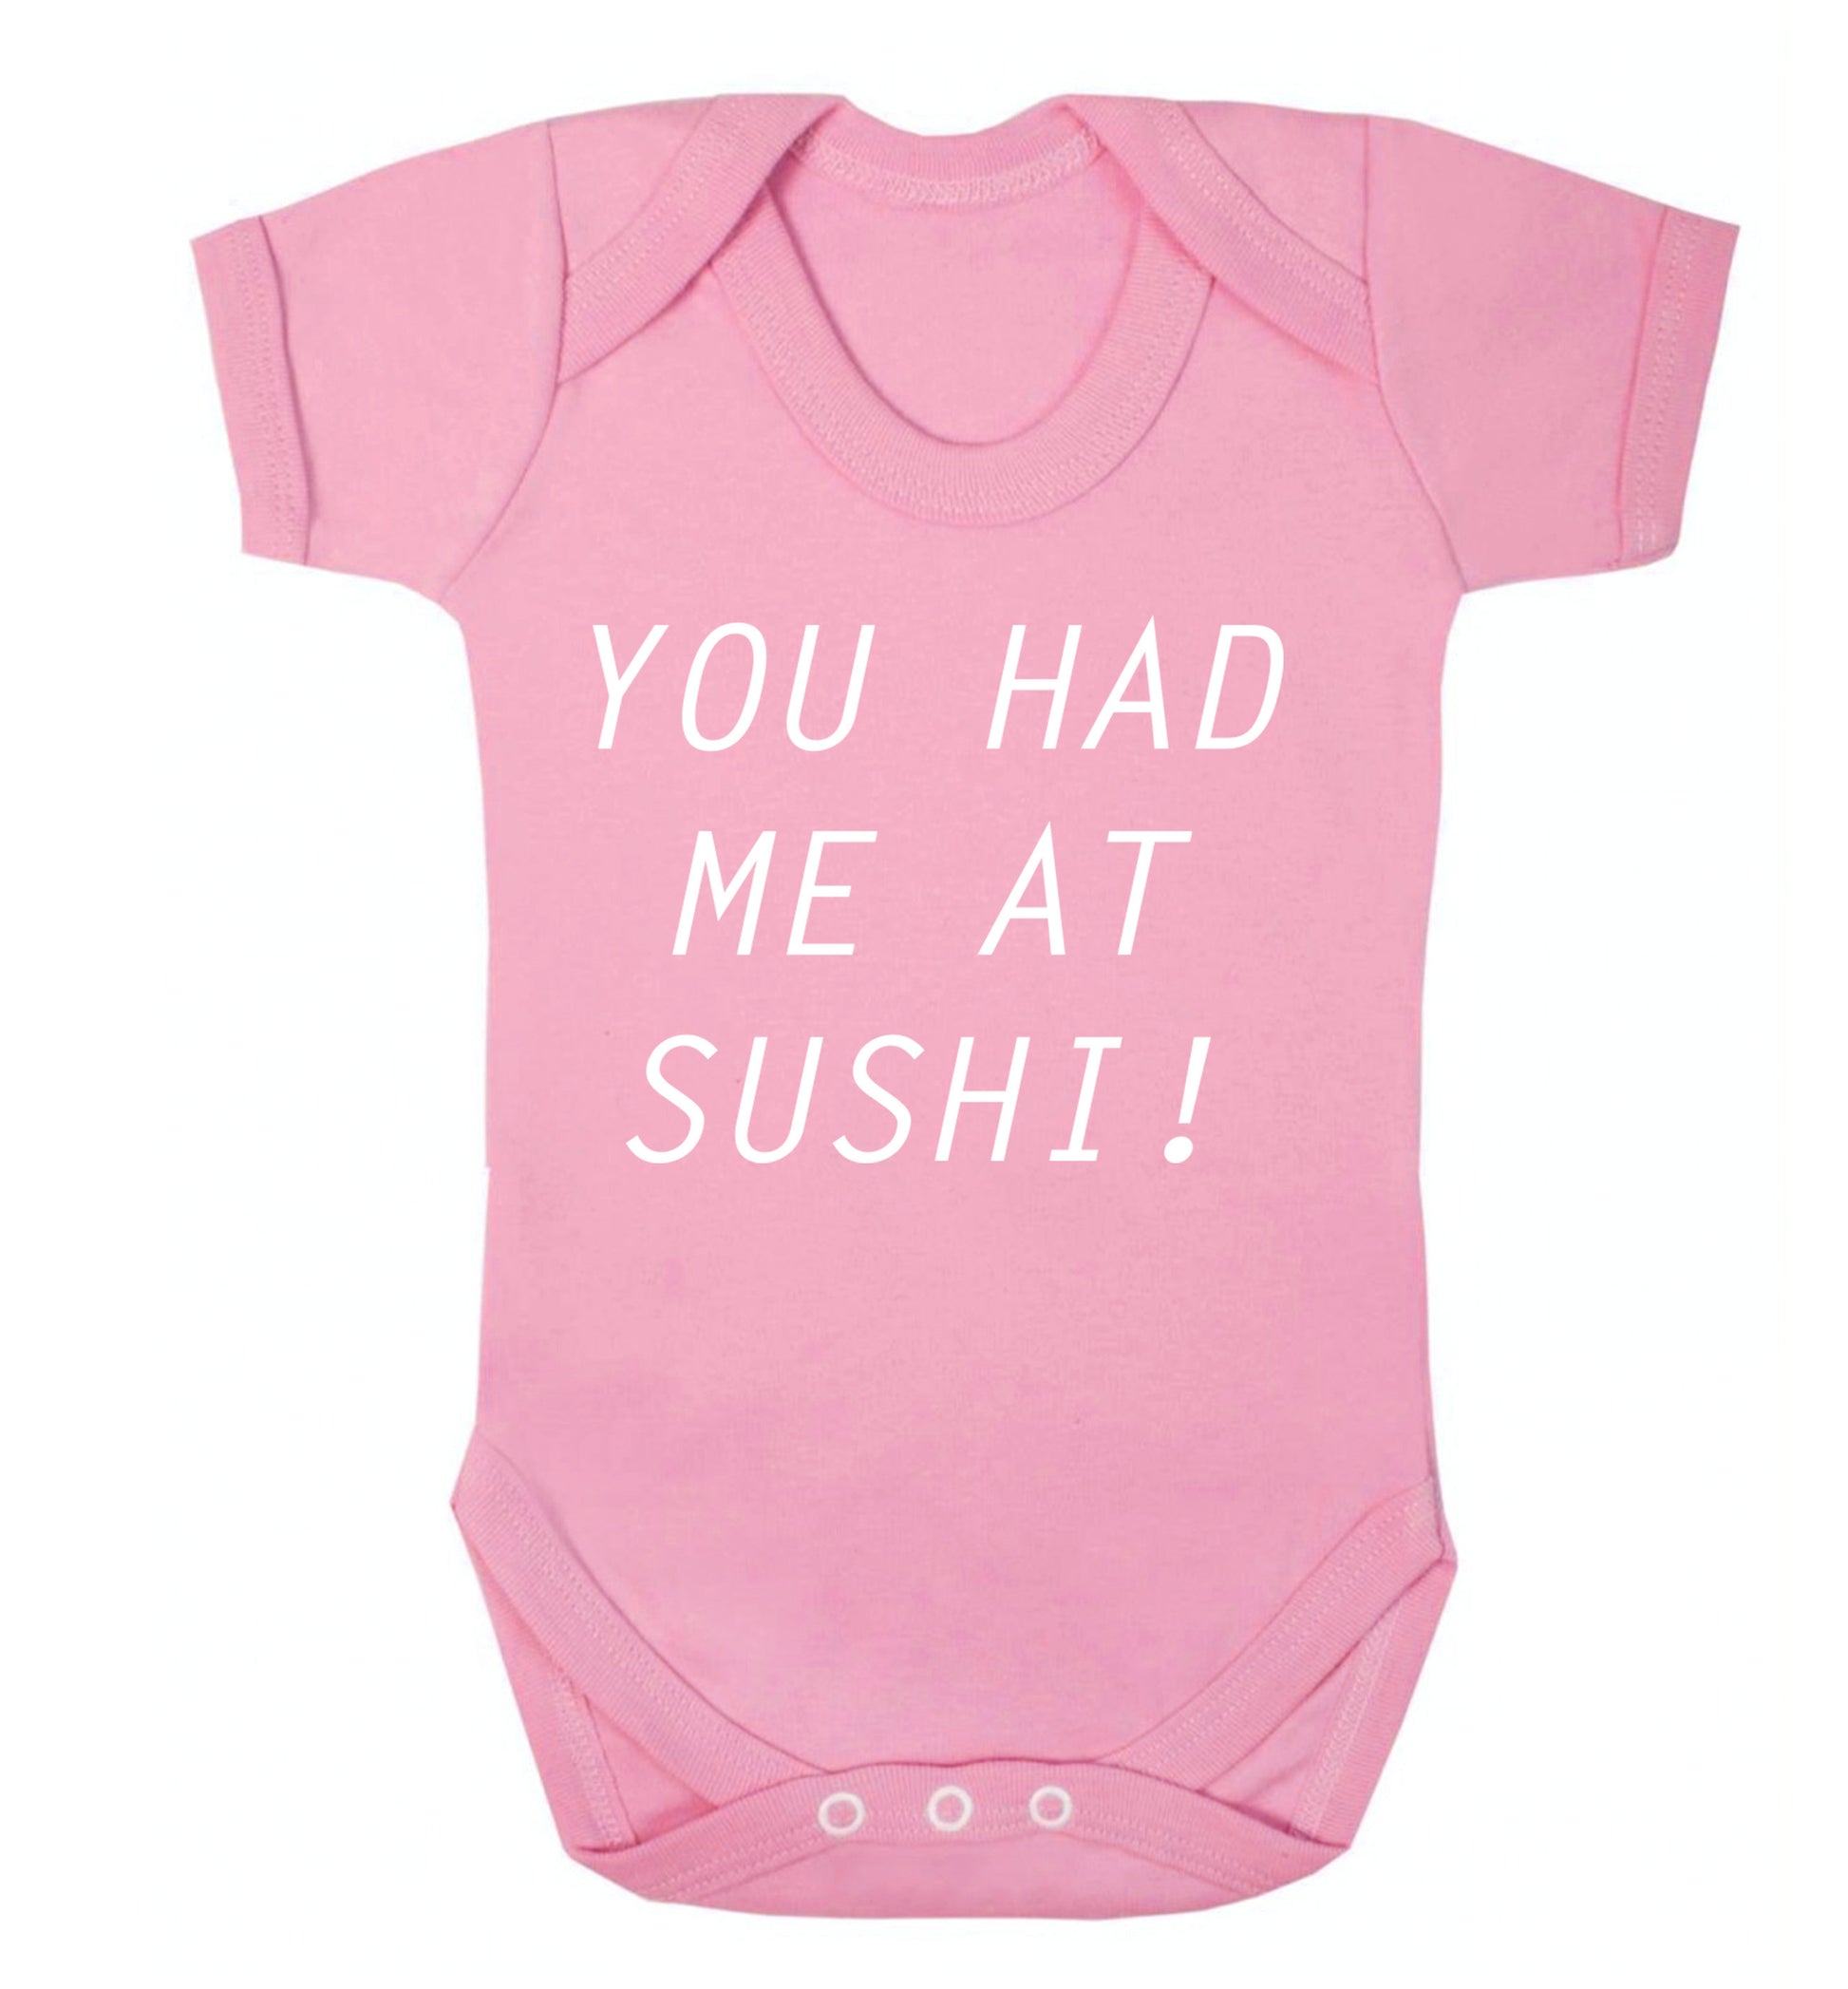 You had me at sushi Baby Vest pale pink 18-24 months